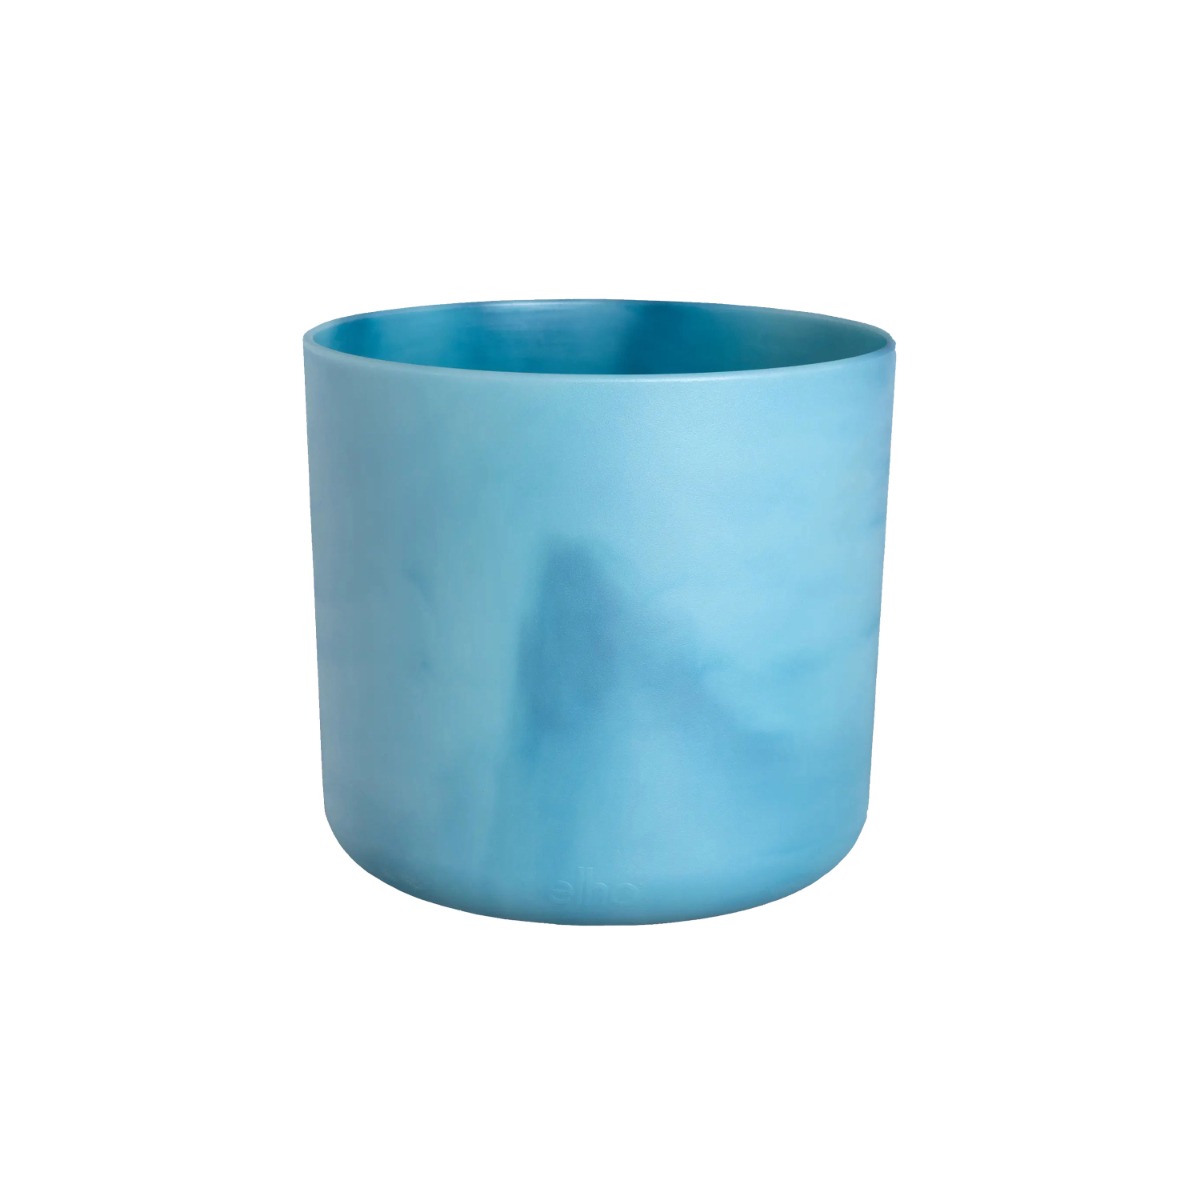 Elho Ocean Collection Recycled Plastic Plant Pot - Blue